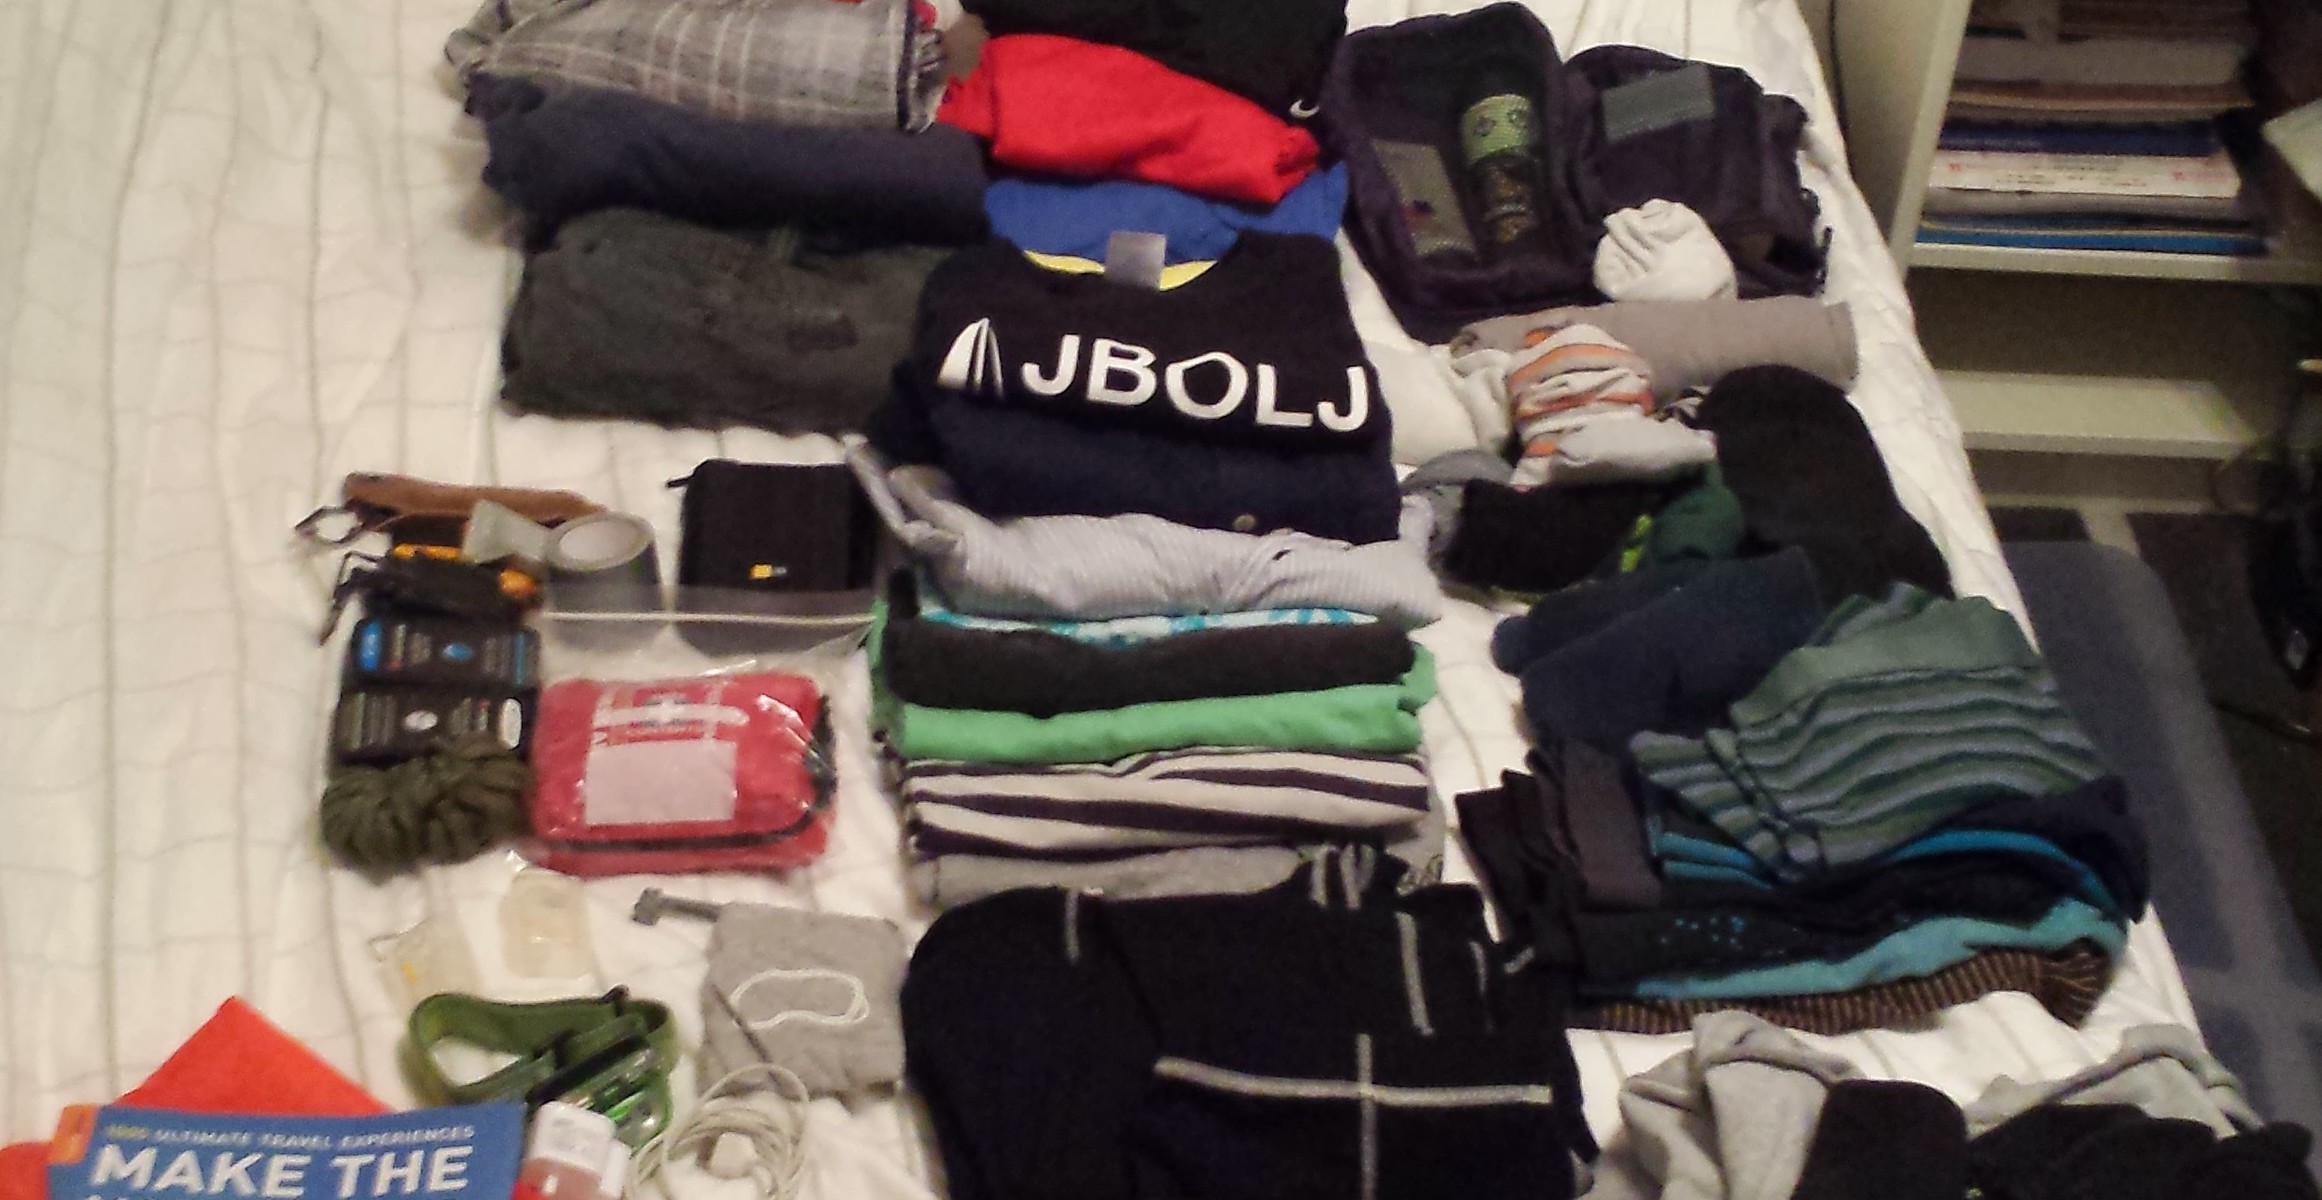 packing for travel